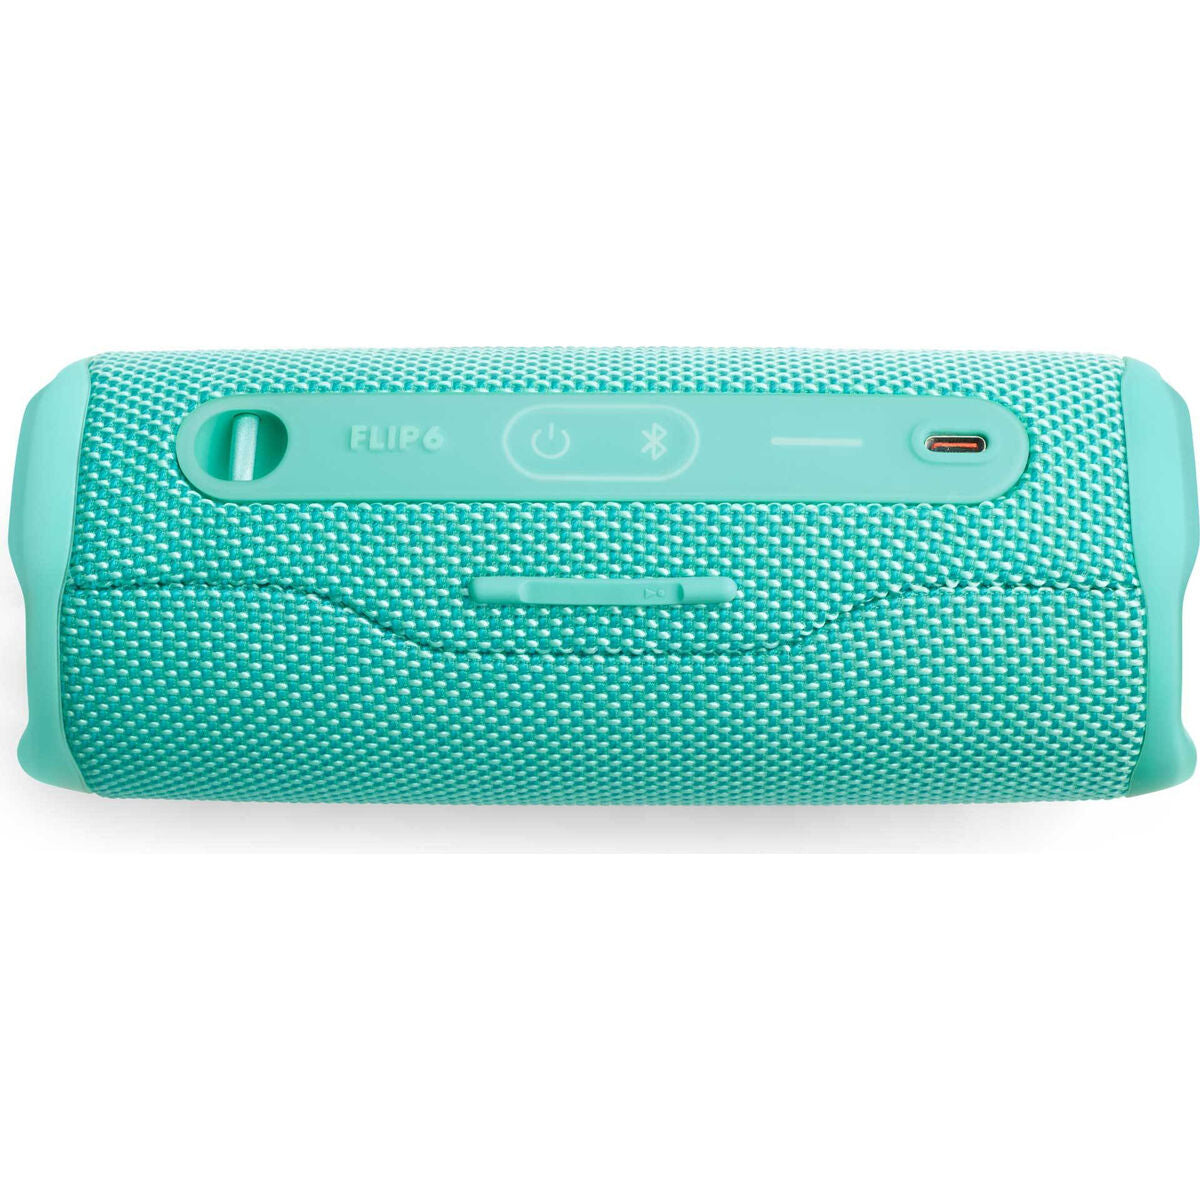 Portable Bluetooth Speakers JBL Flip 6 20 W Turquoise, JBL, Electronics, Mobile communication and accessories, portable-bluetooth-speakers-jbl-flip-6-20-w-turquoise, Brand_JBL, category-reference-2609, category-reference-2882, category-reference-2923, category-reference-t-19653, category-reference-t-21311, category-reference-t-25527, category-reference-t-4036, category-reference-t-4037, Condition_NEW, entertainment, music, Price_100 - 200, telephones & tablets, wifi y bluetooth, RiotNook